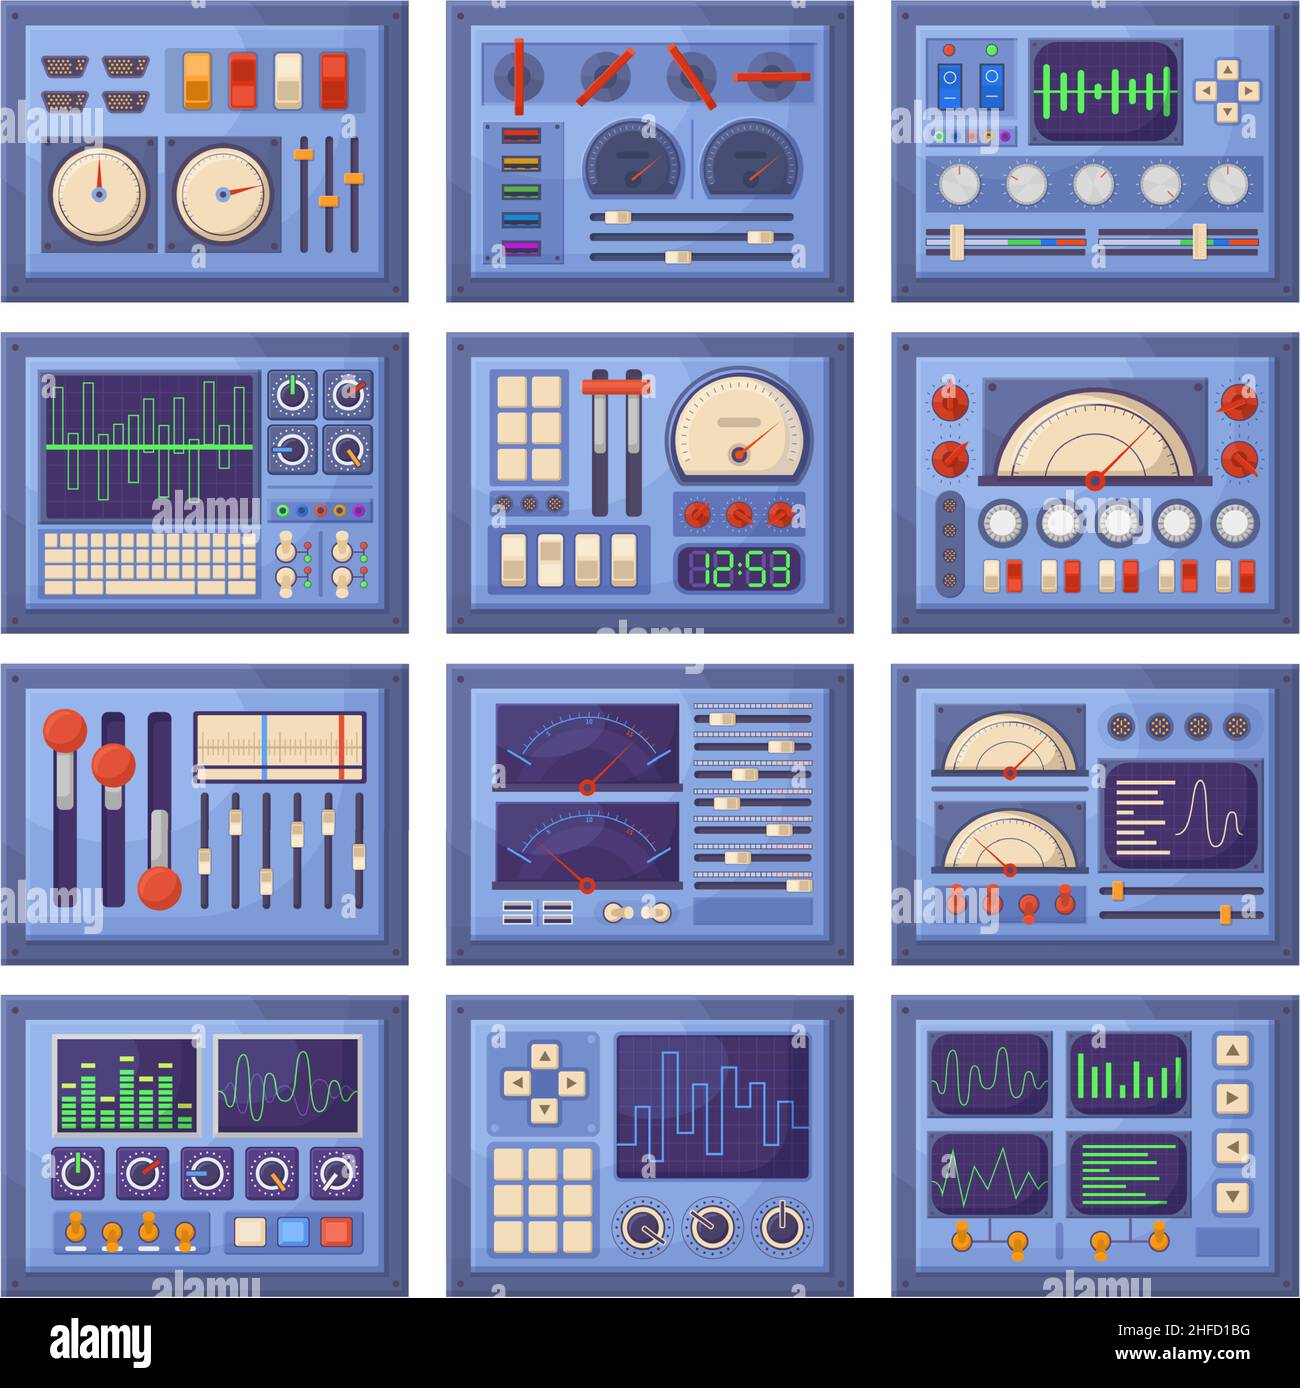 Electrical dashboard, control panels with charts, buttons and tuners. Retro dashboard control panels elements vector illustration set. Spacecraft Stock Vector